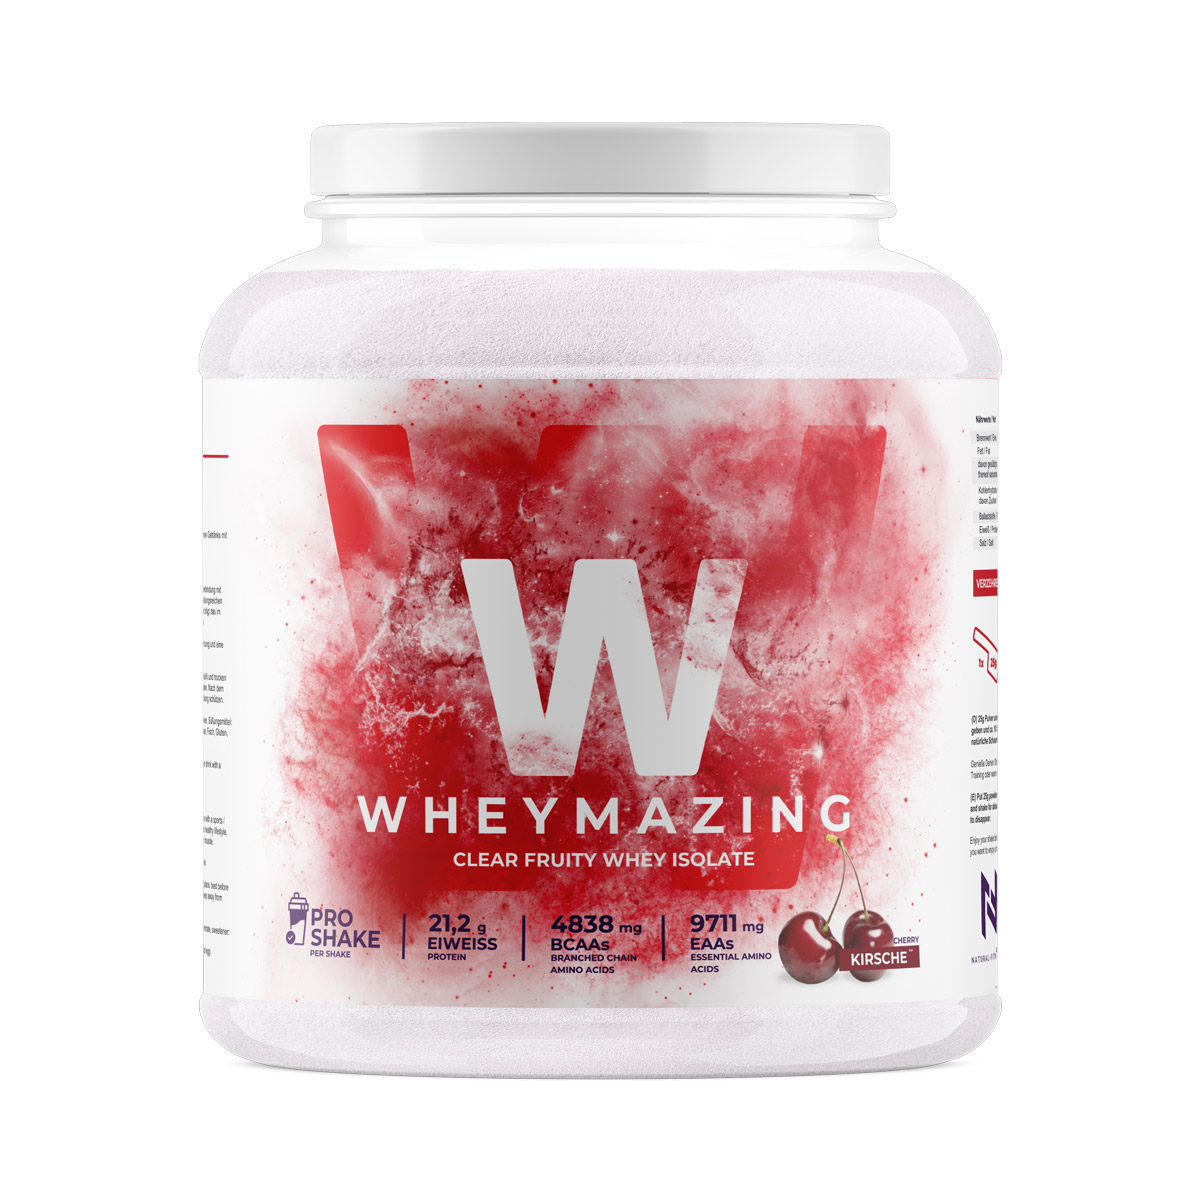 Wheymazing-Clear-Fruity-Whey-Isolate-Kirsche-Packshot-FRONT